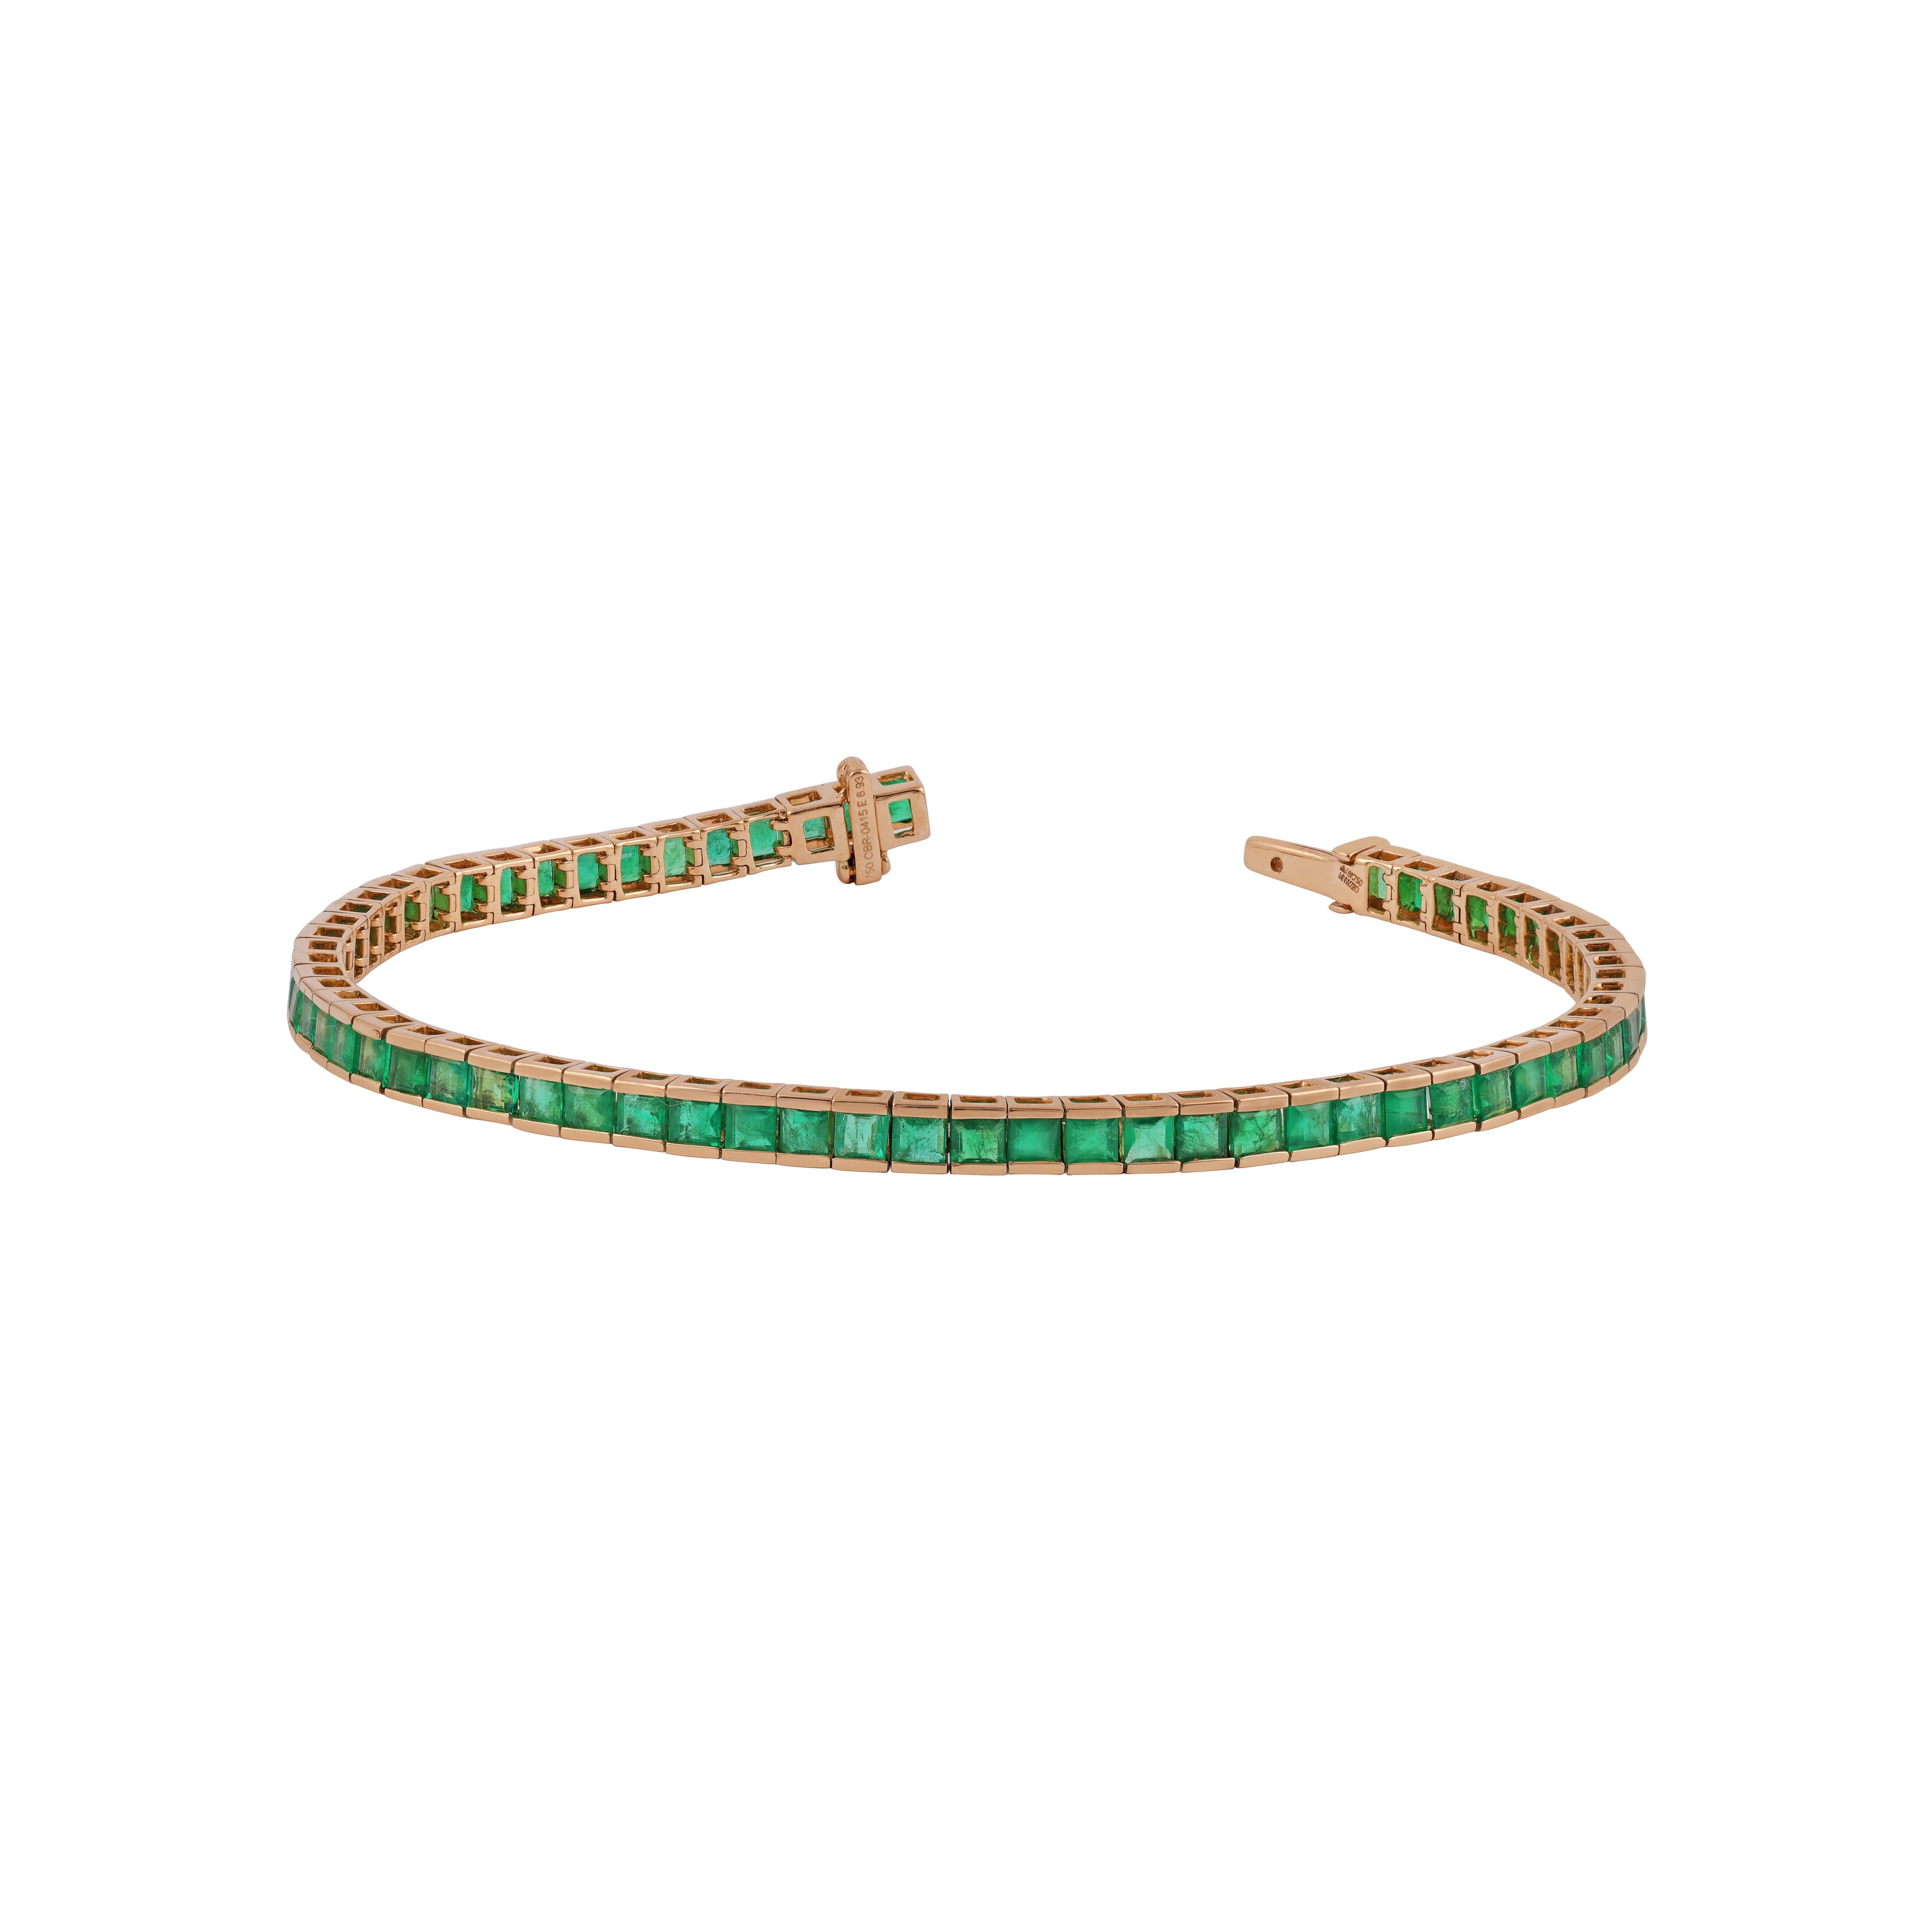 This is an elegant Clear Emerald tennis bracelet featuring 63 square emeralds with 6.93 carats in the nice channel setting. Fine emeralds are well known internationally for their splendid color . This bracelet entirely made in 18 karat yellow gold